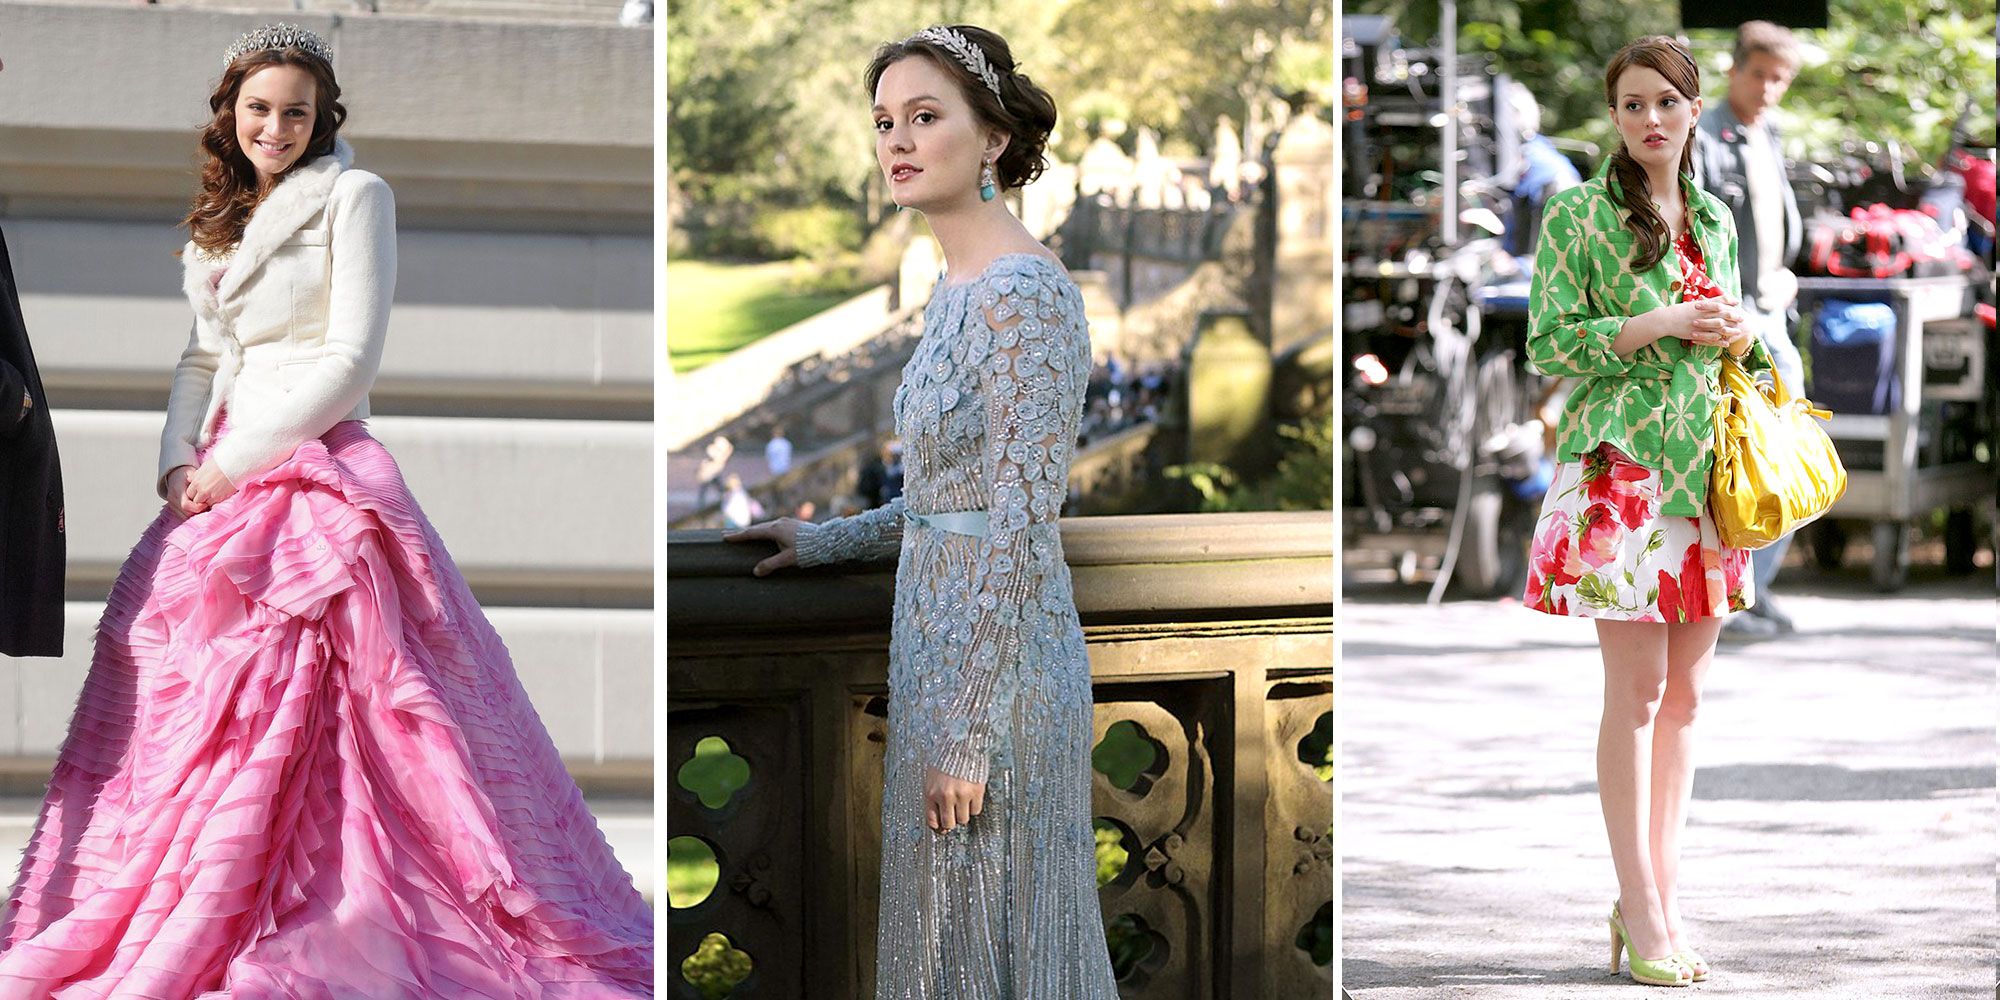 Gossip Girl Blair Waldorf Inspired Outfits - Central Florida Chic